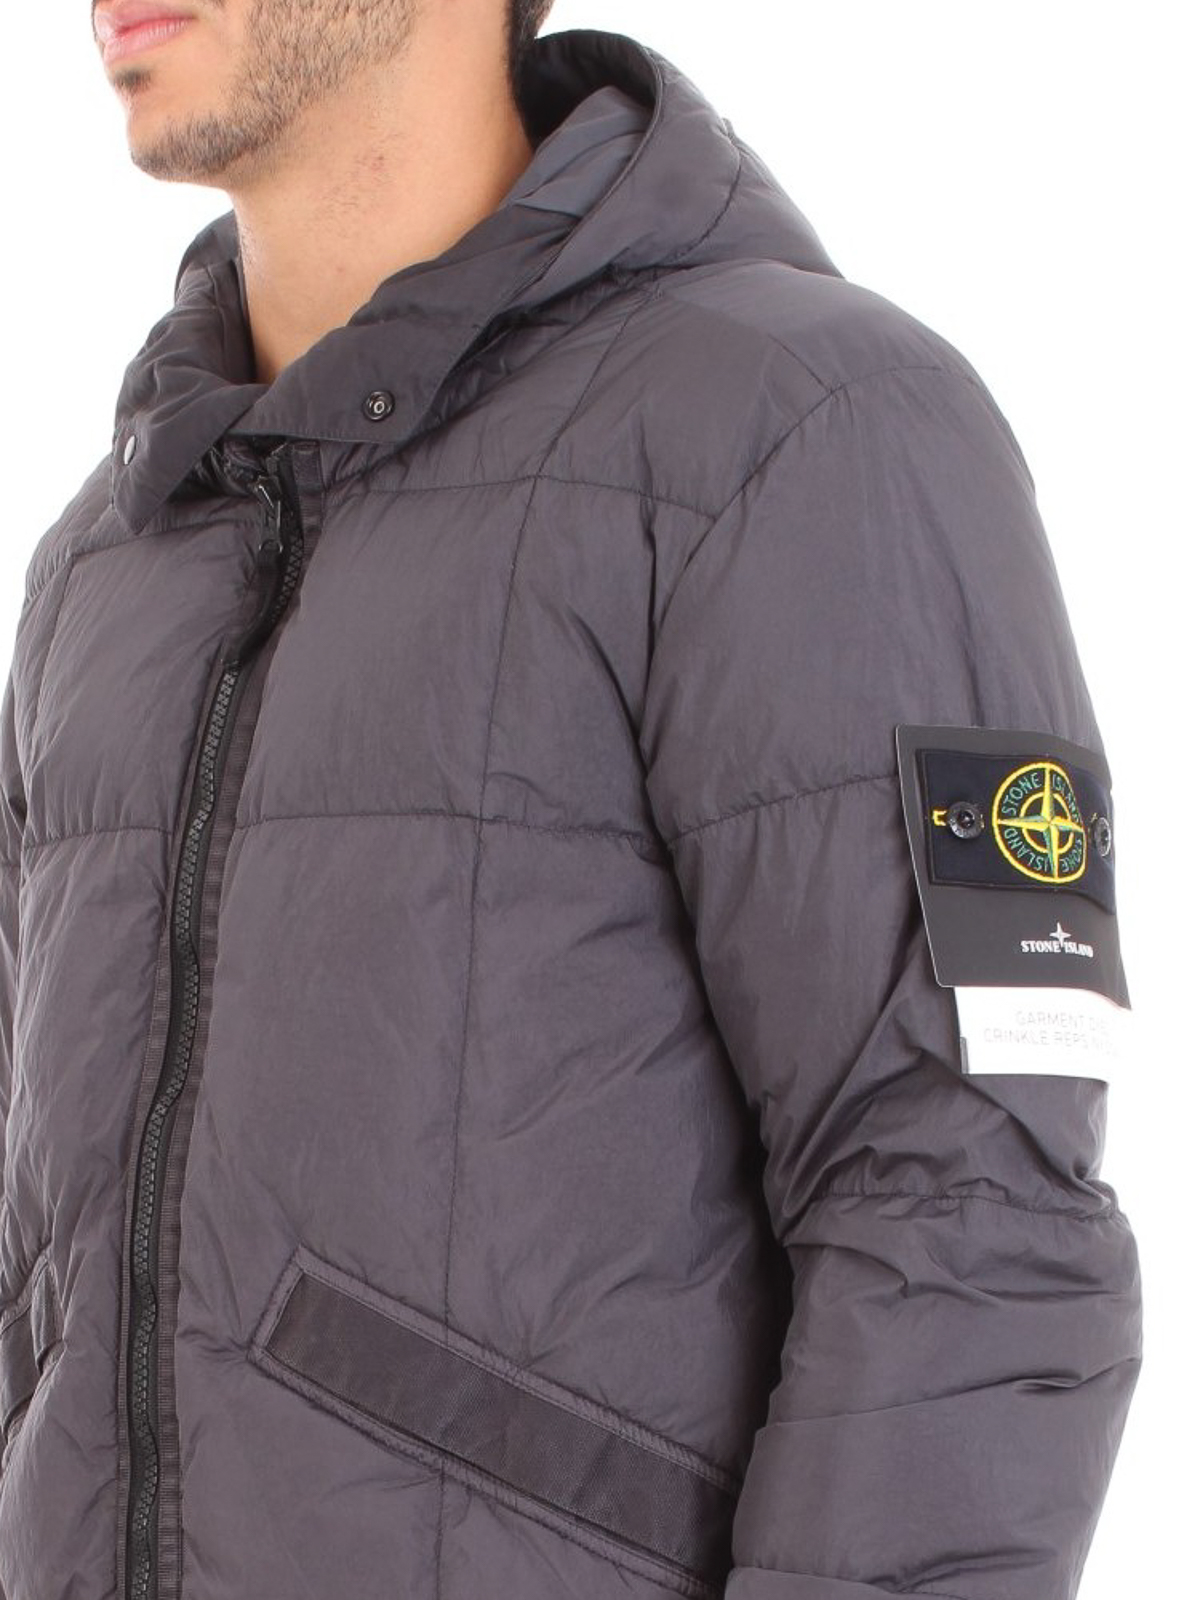 kwaad mouw tanker ダウン・ハイテクジャケット Stone Island - Garment Dyed Crinkle Reps Ny Down -  711540223V0067